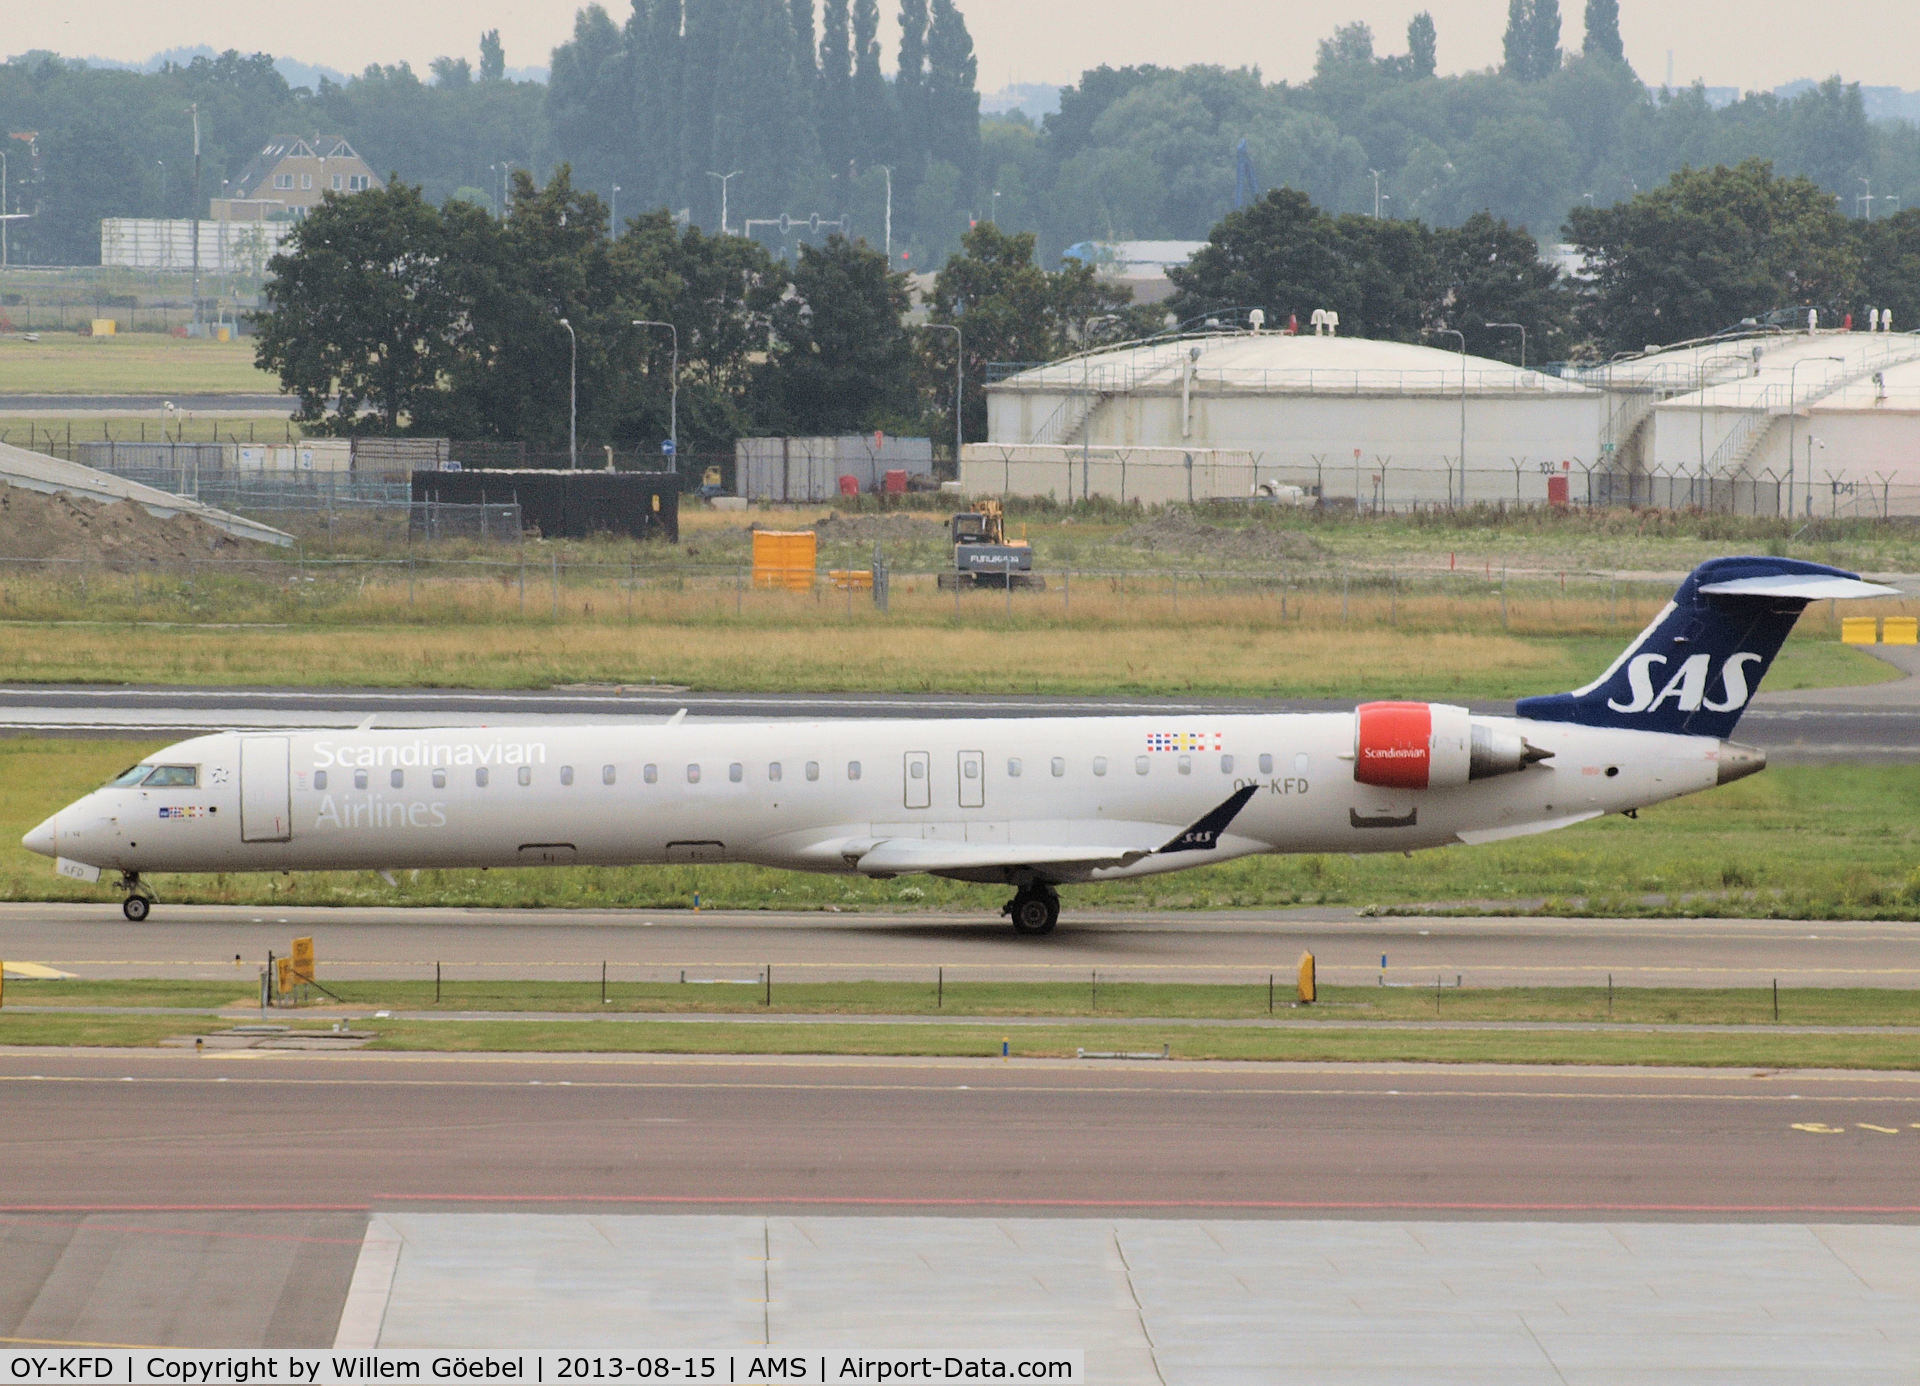 OY-KFD, 2009 Bombardier CRJ-900 (CL-600-2D24) C/N 15221, Taxi to runway 27 of Schiphol Airport